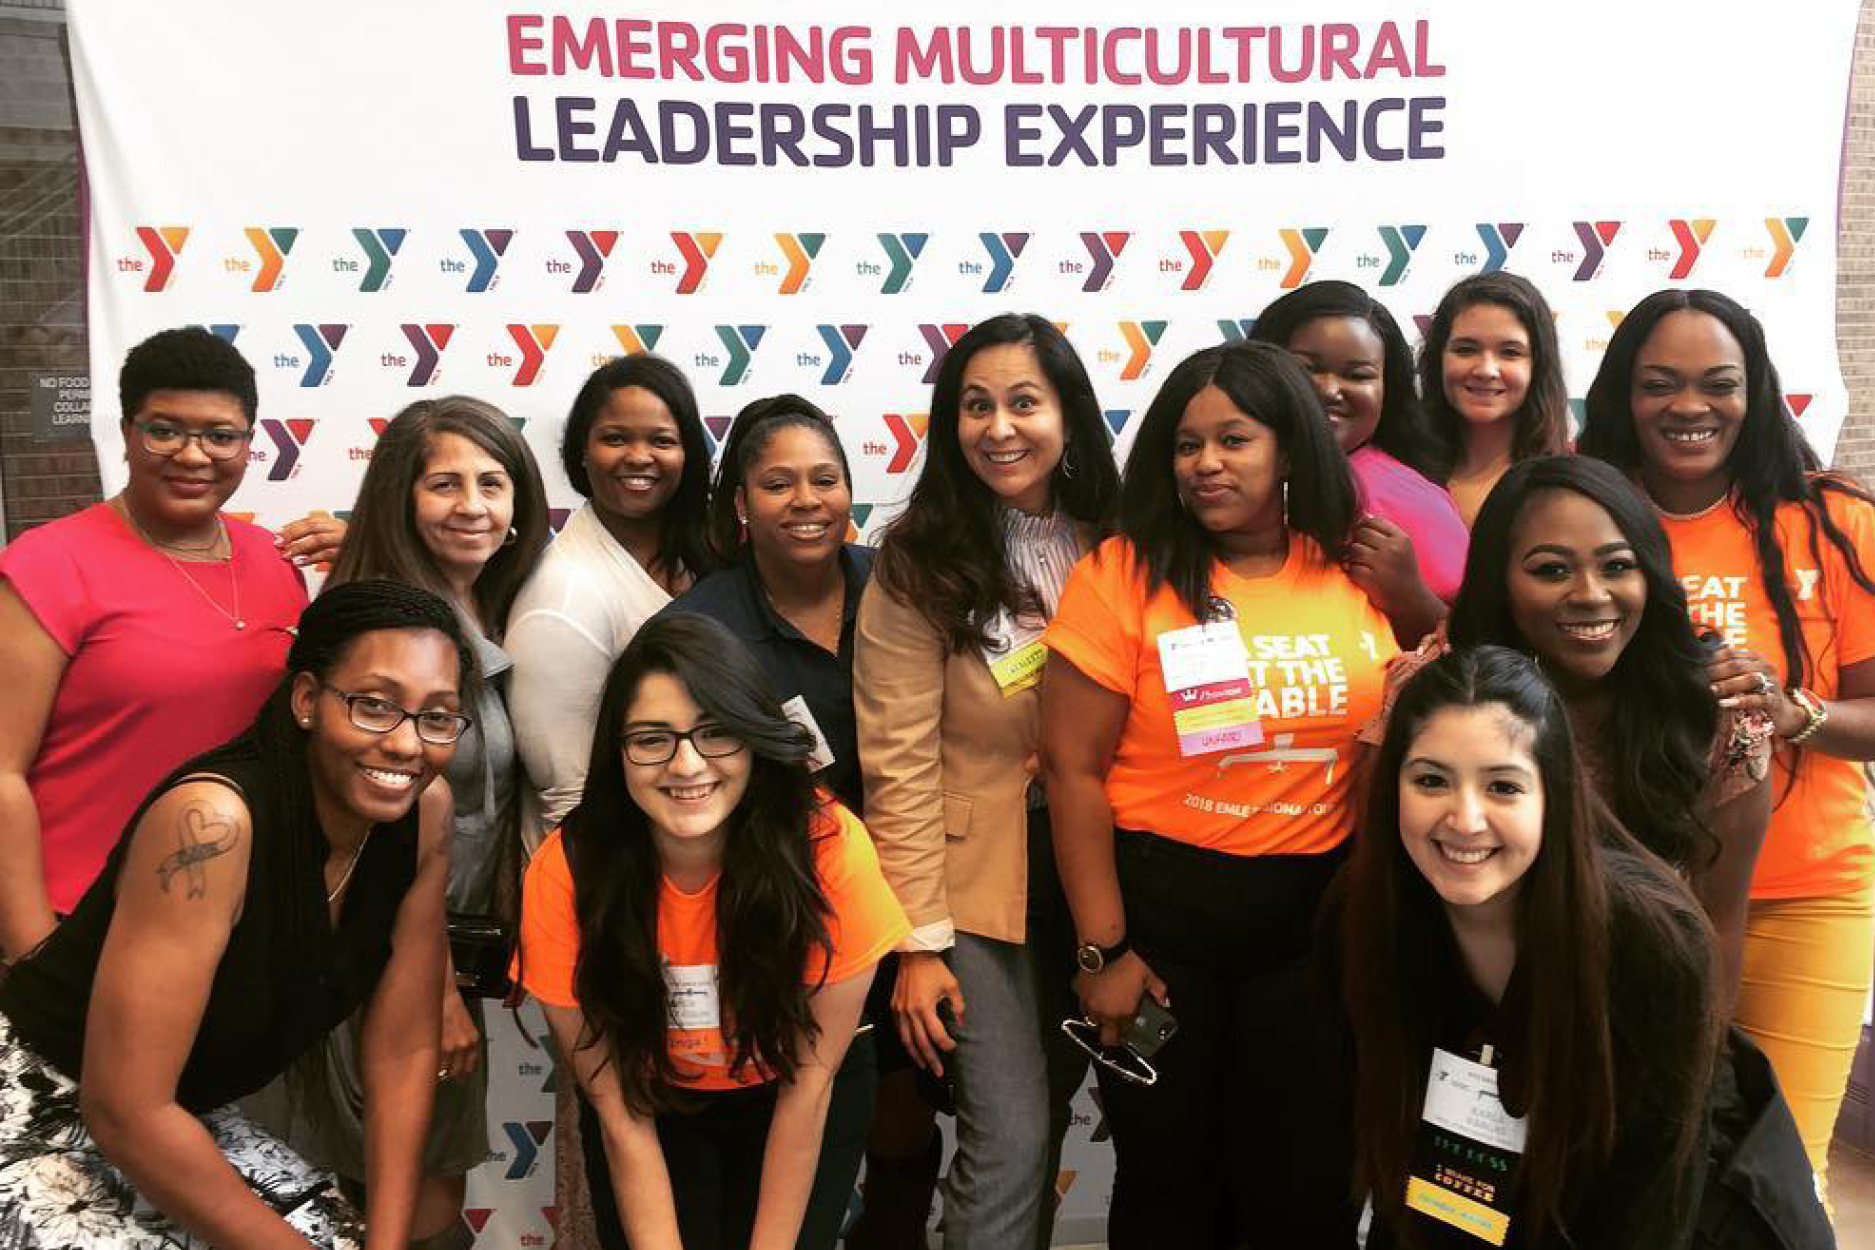 A group of multicultural women smiling and standing in front of a step-and-repeat reading "Emerging Multicultural Leadership Experience"